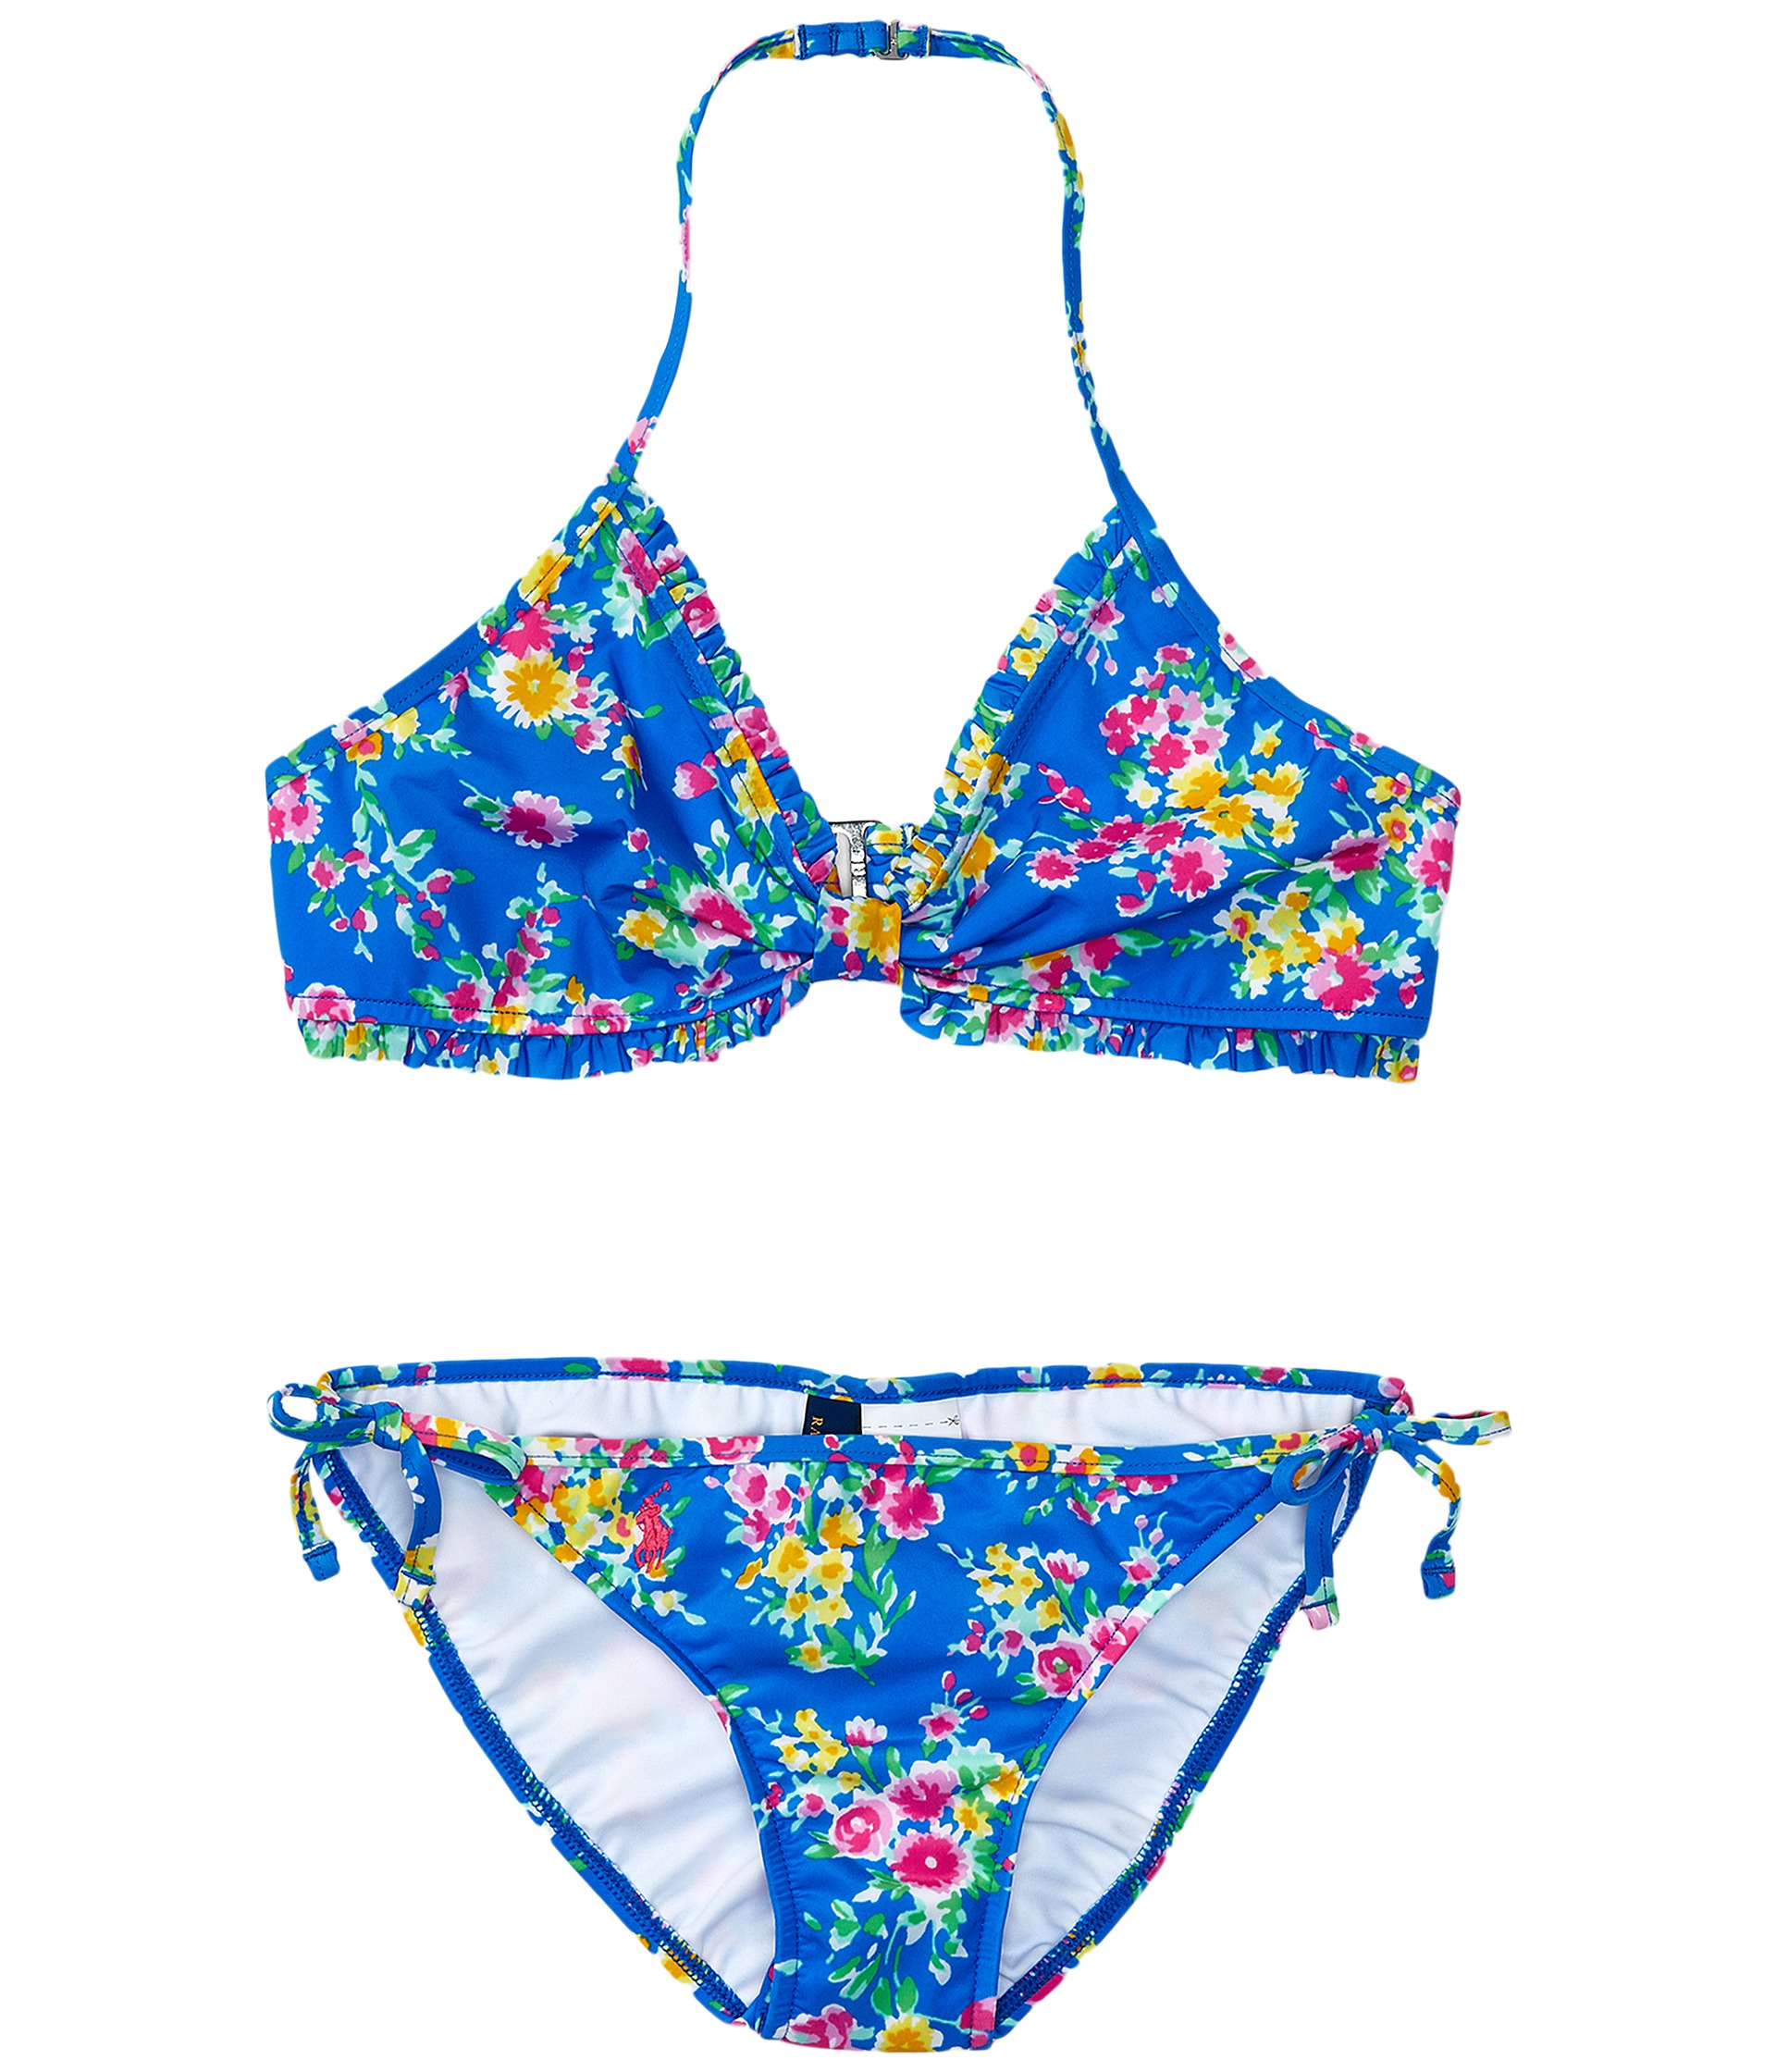 Polo Ralph Lauren Kids Floral Two-Piece Swimsuit (Big Kids) at Zappos.com